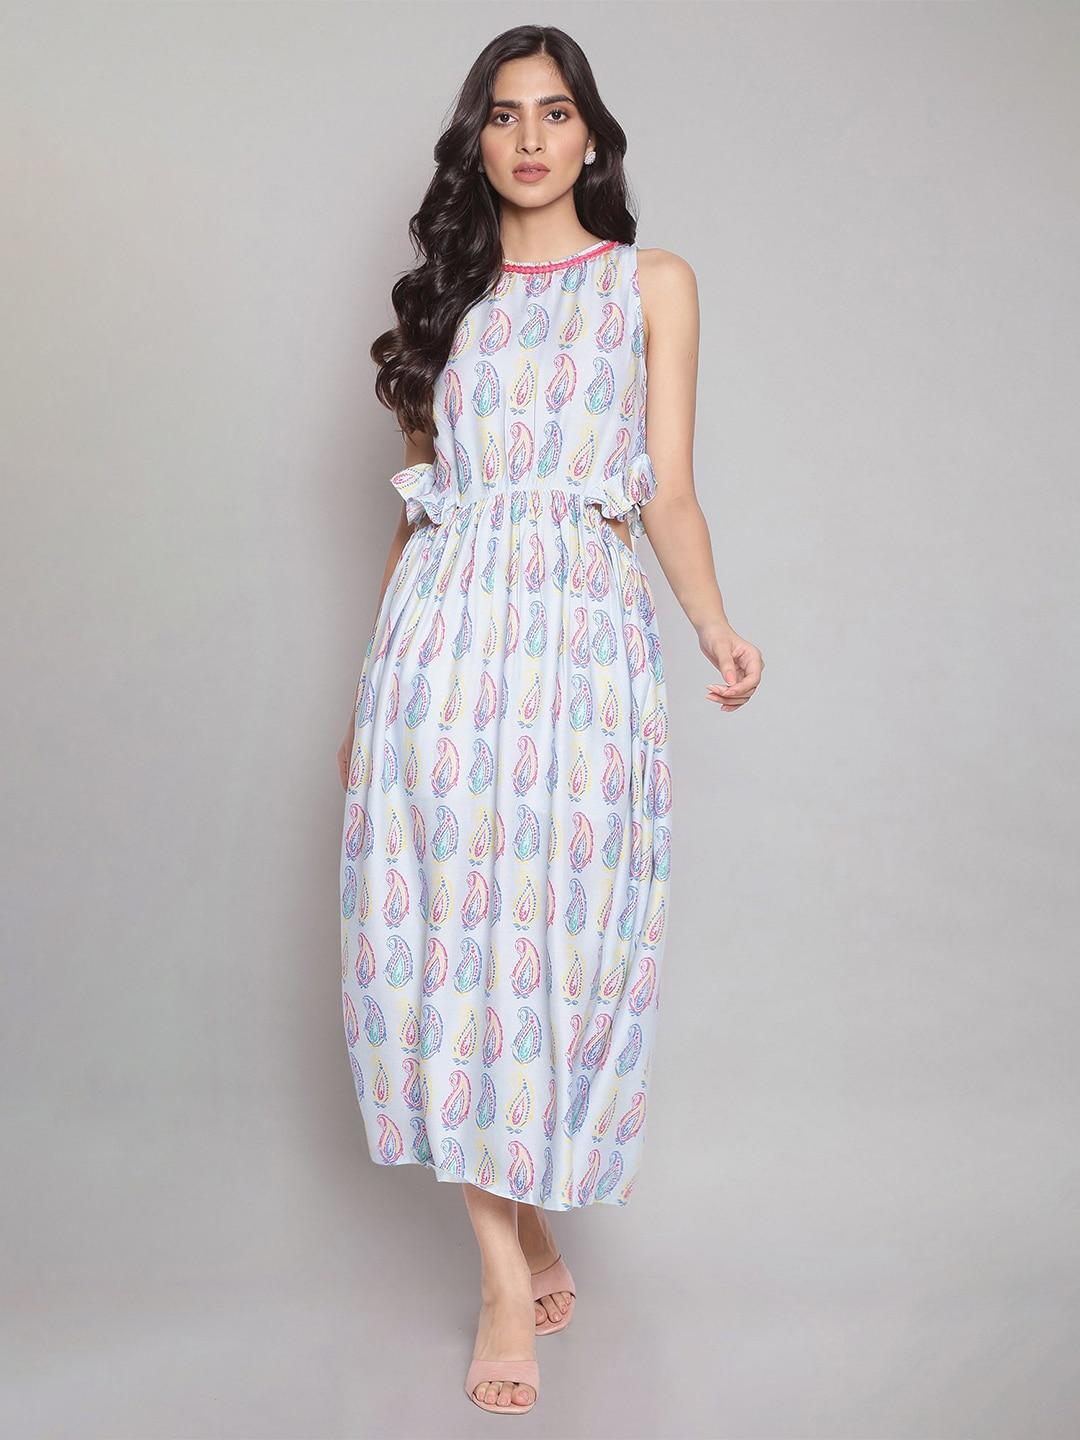 w-blue-floral-omplalodes-printed-dress-with-cut-outs-waist-and-gathers.